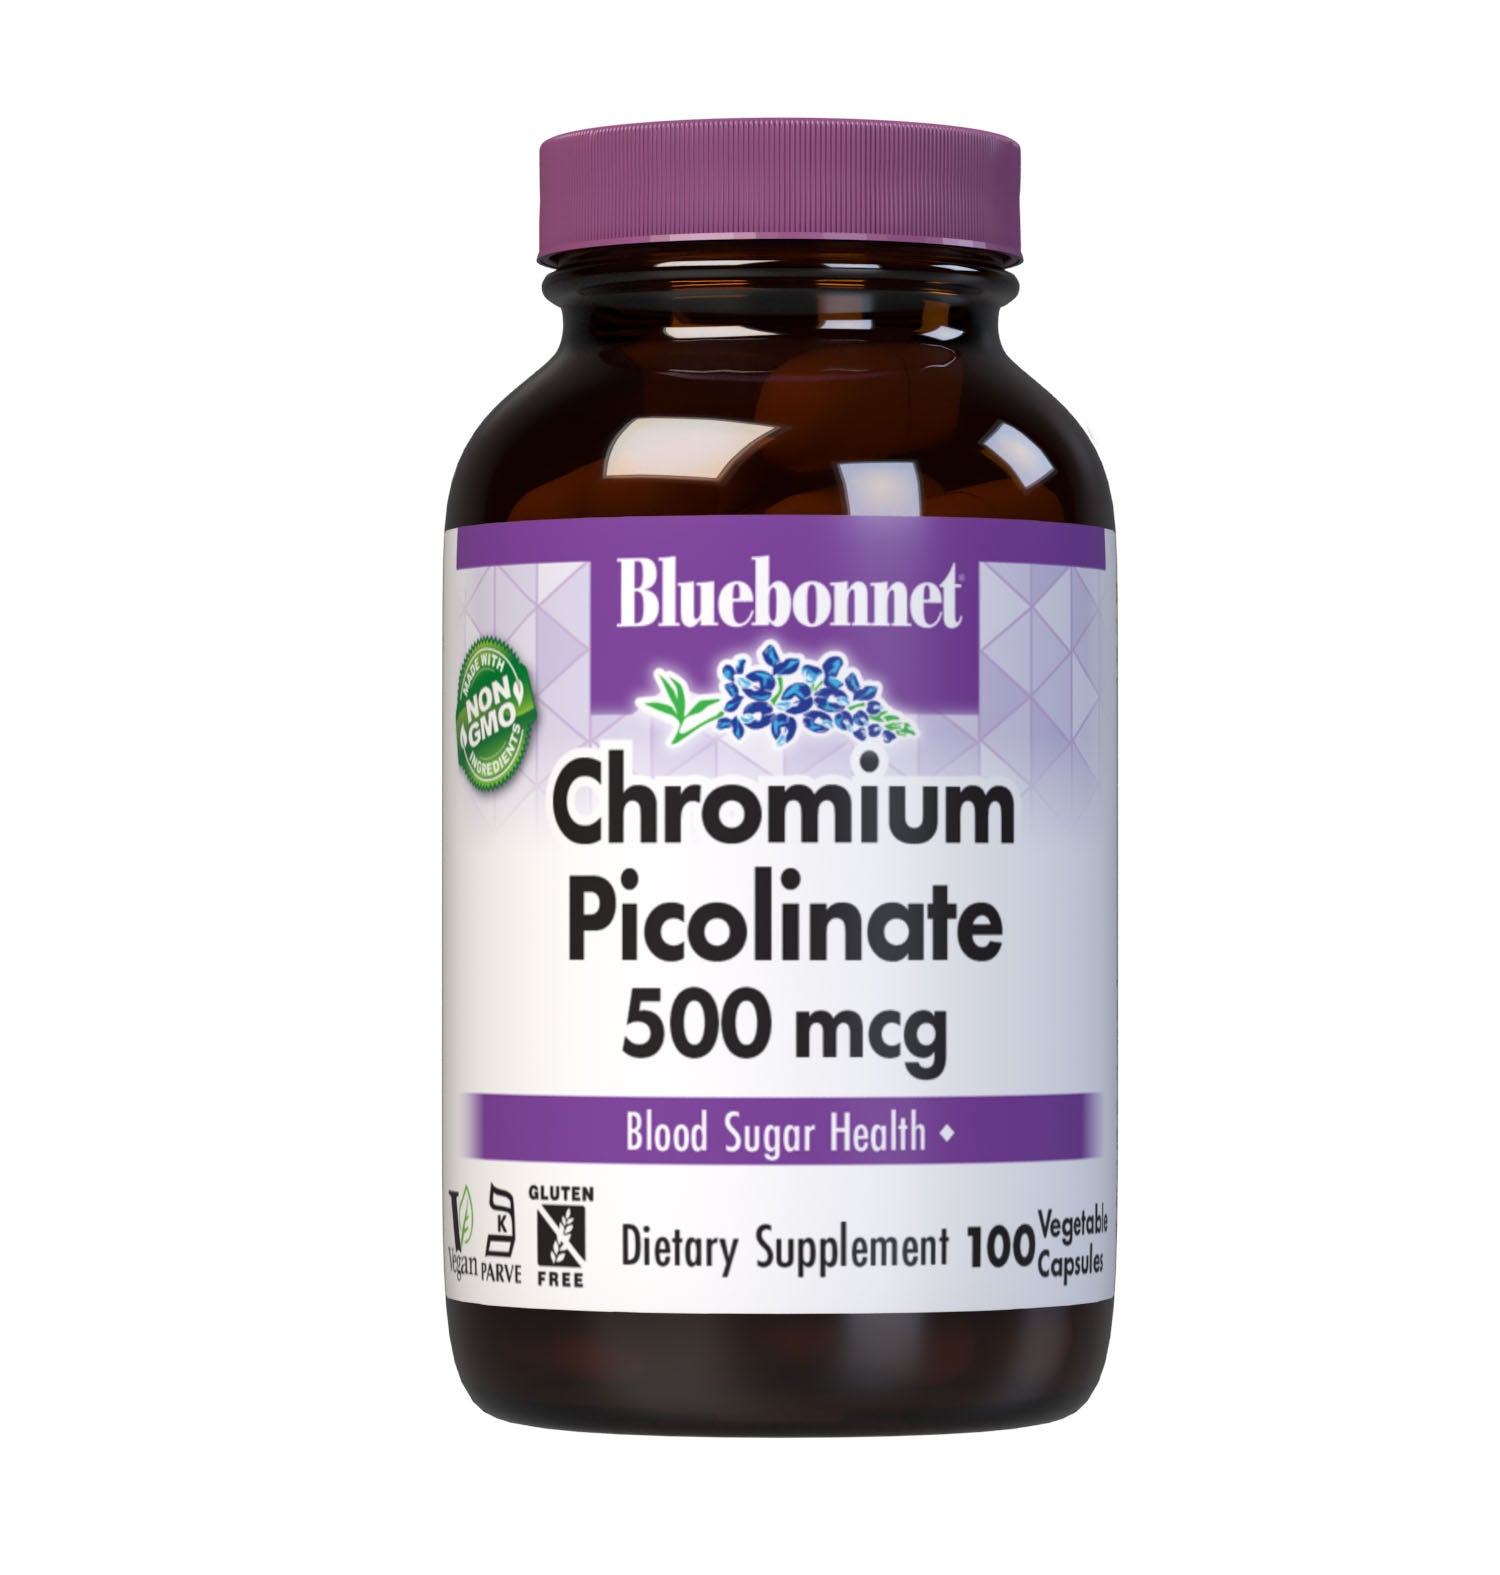 Bluebonnet's Chromium Picolinate 500 mcg 100 Vegetable Capsules are formulated with yeast-free chromium in a chelate of picolinic acid. Chromium is a micromineral that supports healthy glucose metabolism. #size_100 count